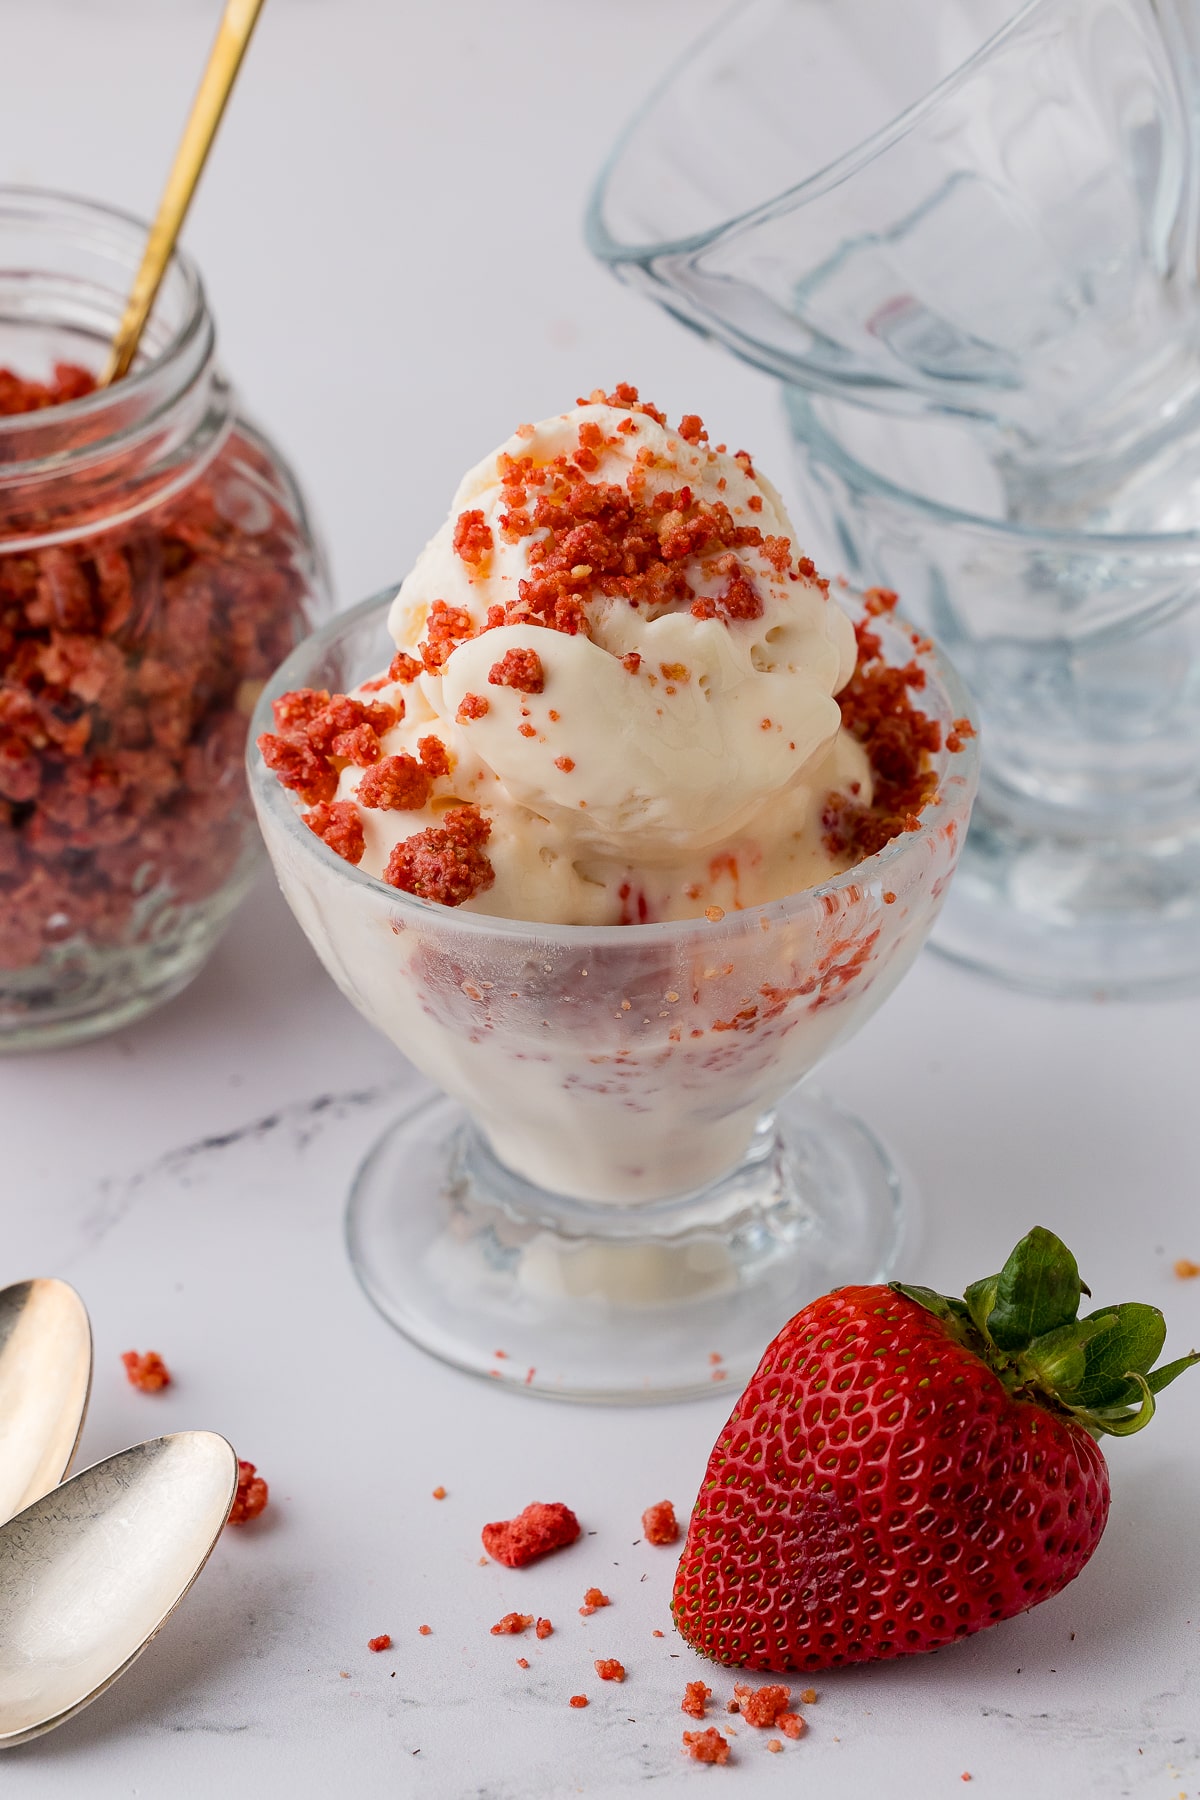 strawberry crunch sprinkled on a vanilla ice cream sunday with spoons, a fresh strawberry, extra glass sunday dishes and strawberry crunch on a white countertop